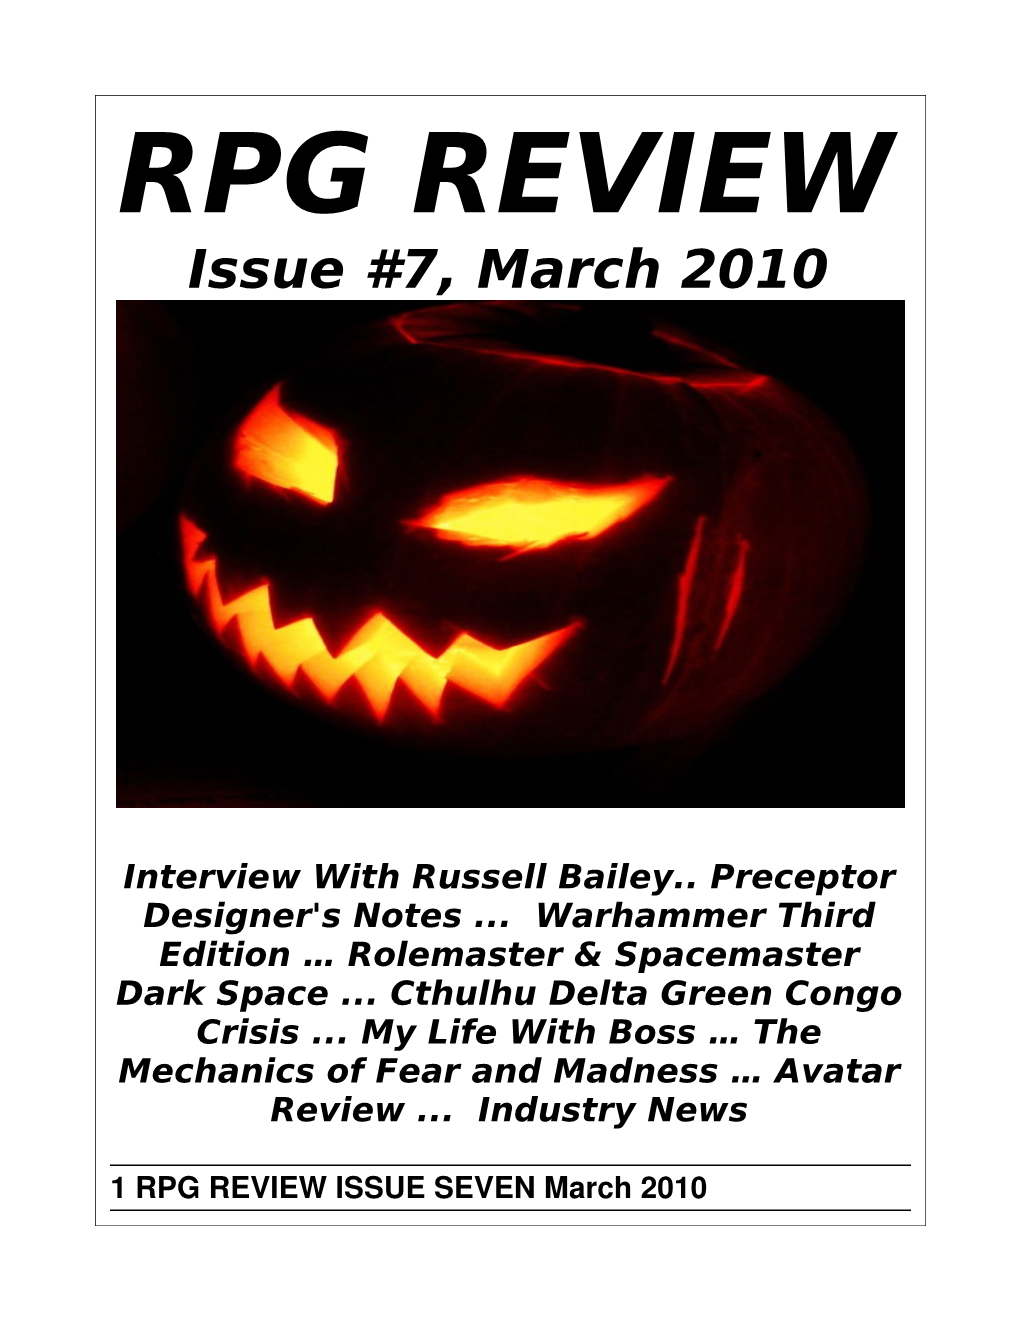 RPG Review Issue 7, March 2010